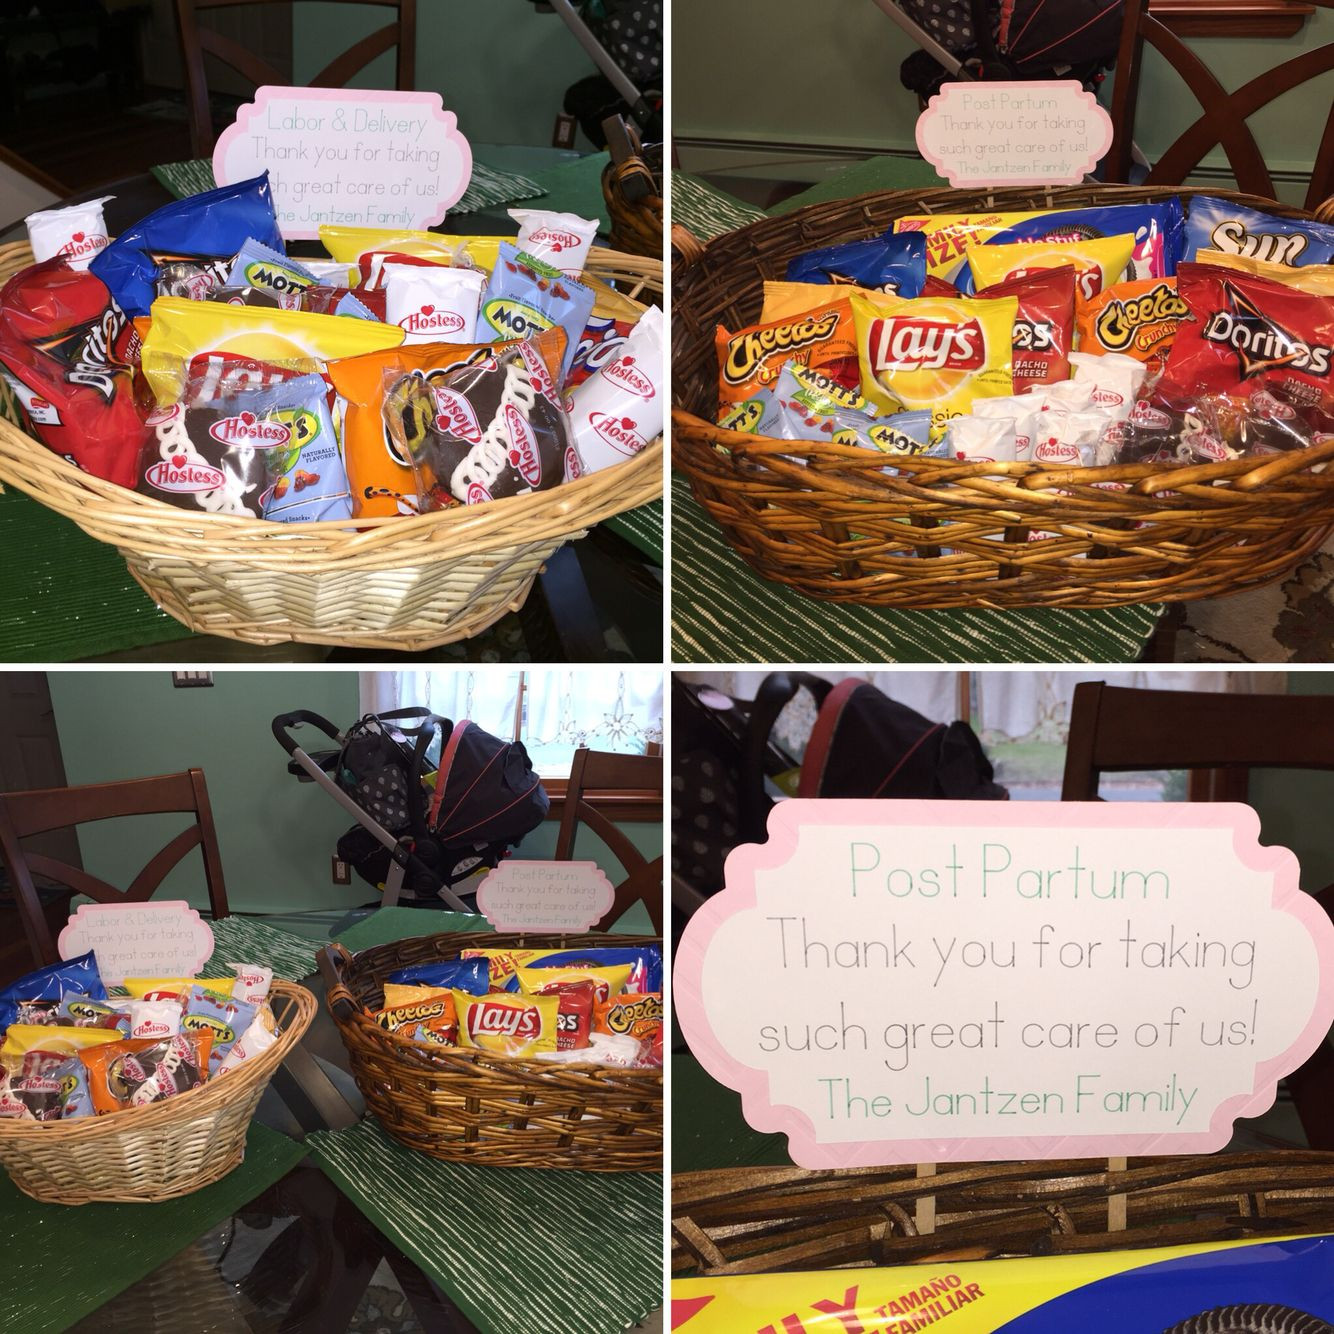 Thank You Delivery Gift Ideas
 Thank you basket for nurses and staff labor and delivery